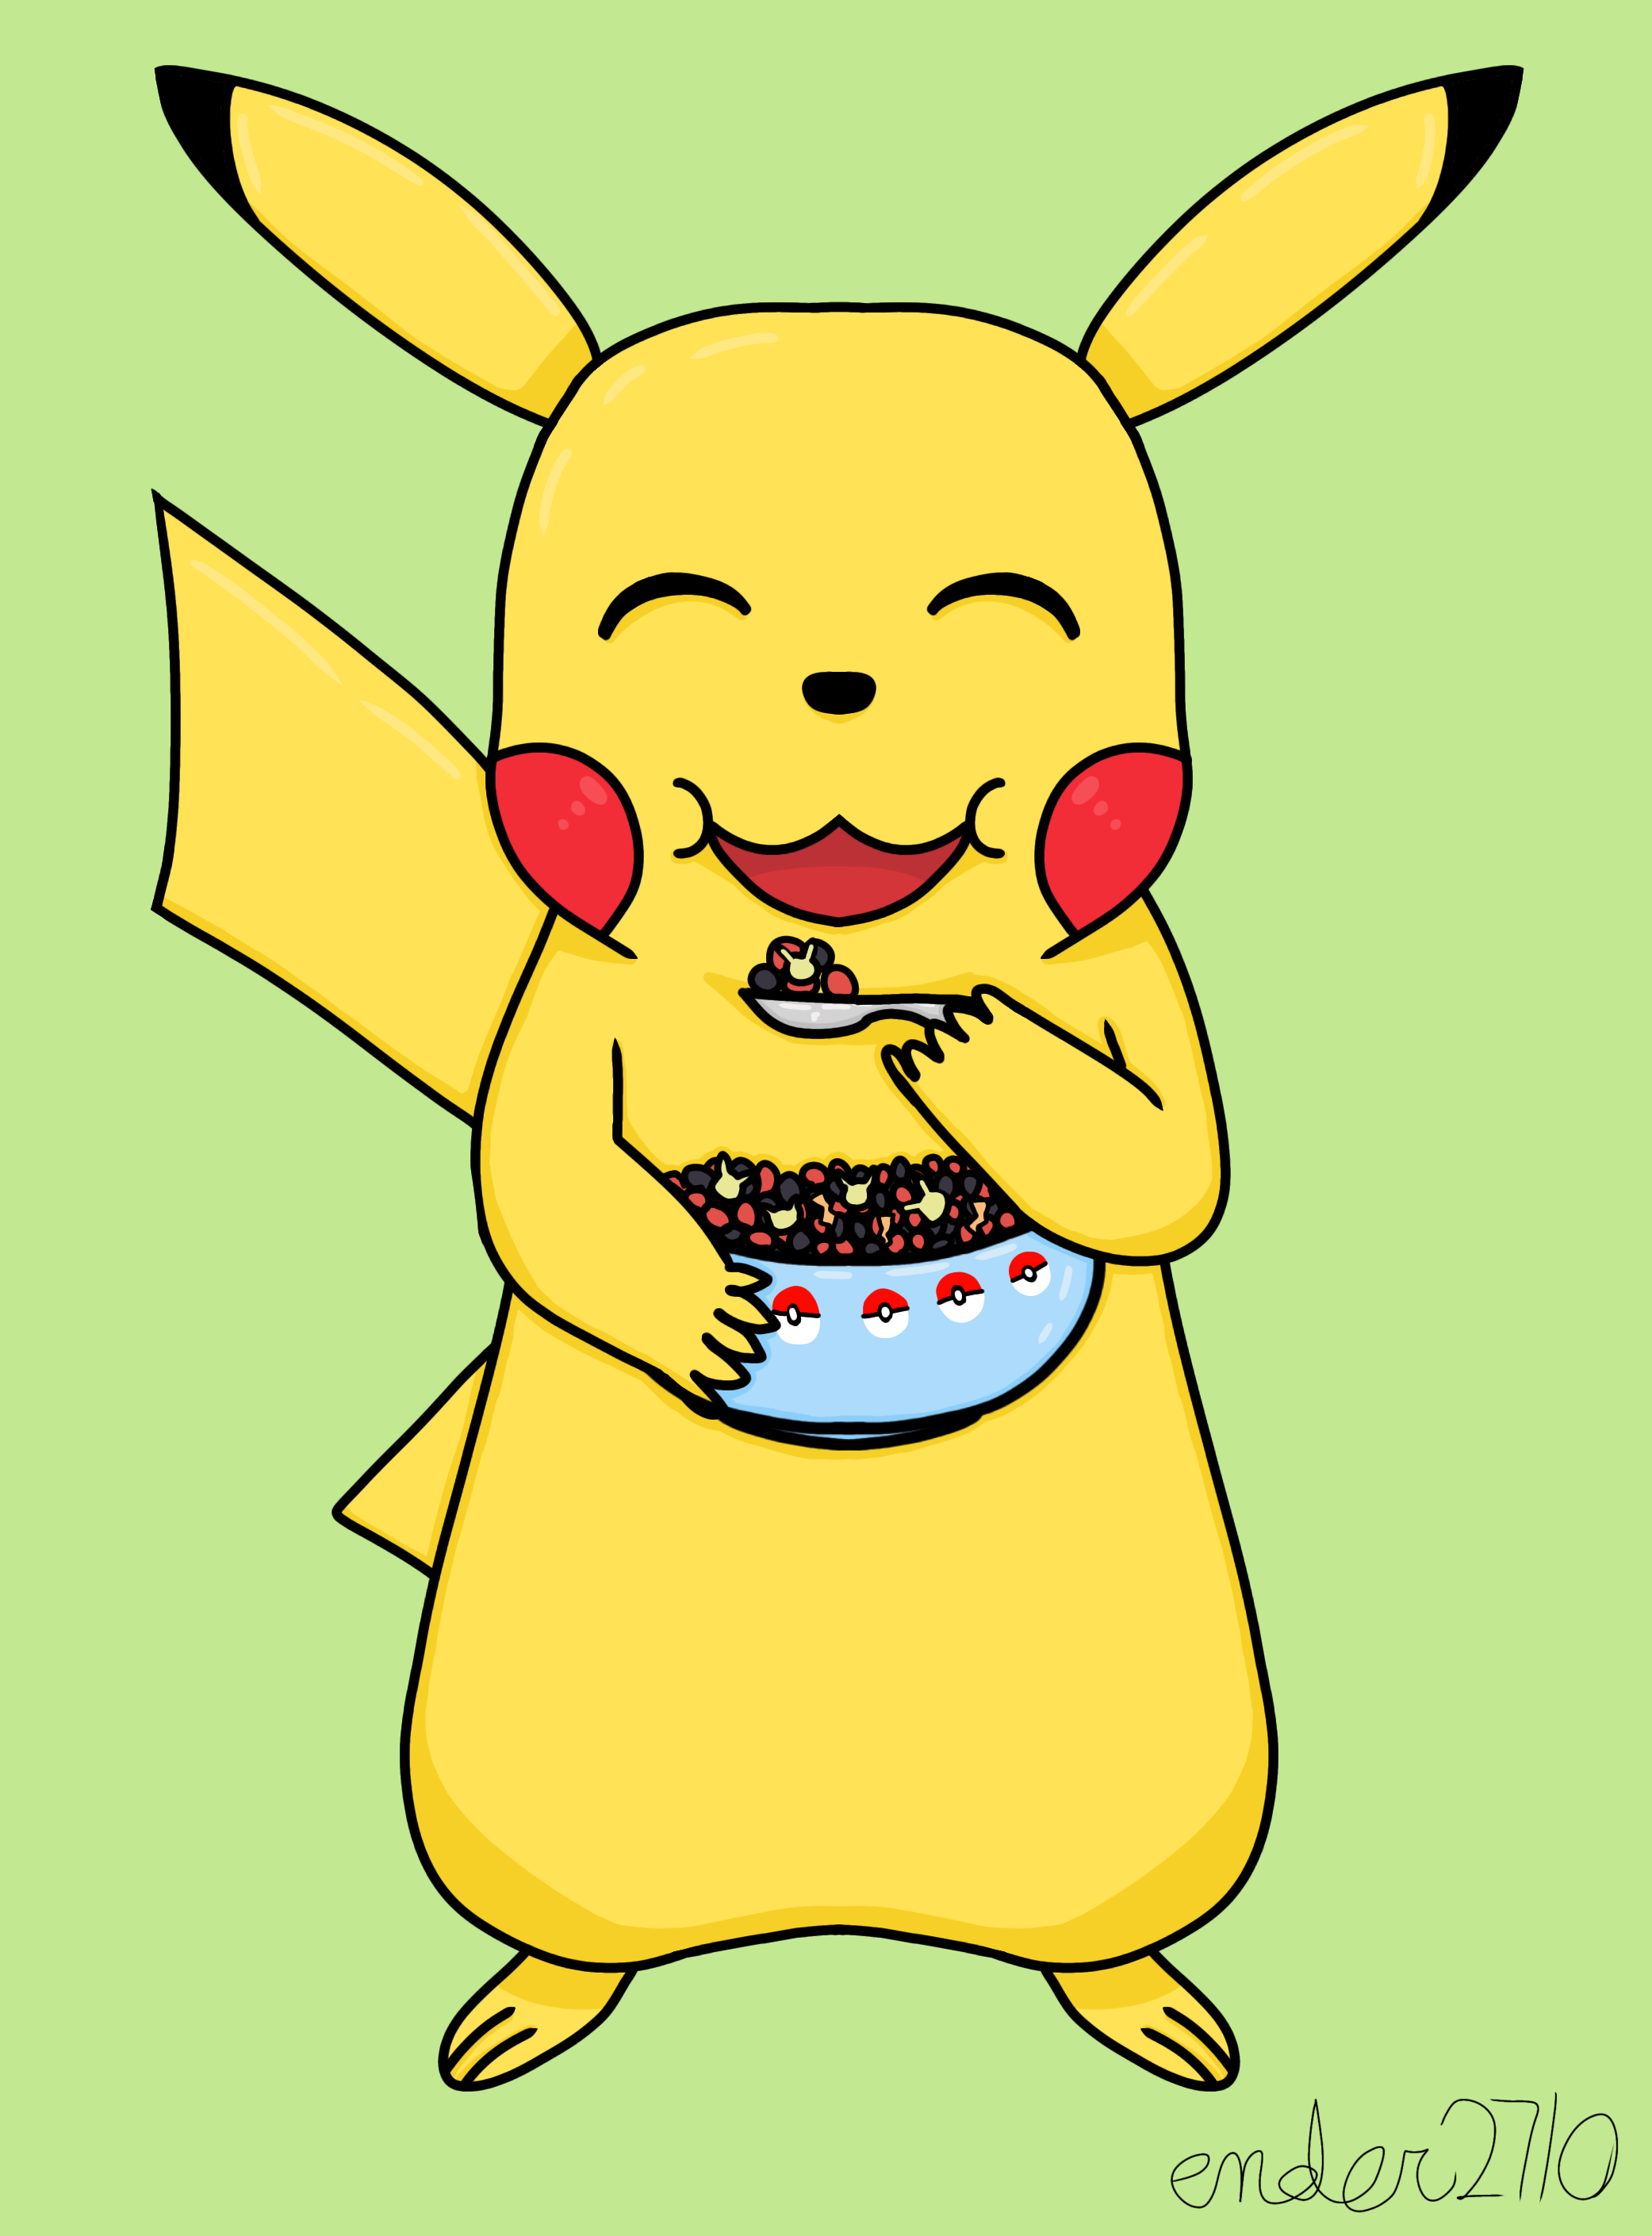 Cuyo Maravilloso Térmico Pikachu Eating Berry Bolt Cereal by ender2710 on DeviantArt